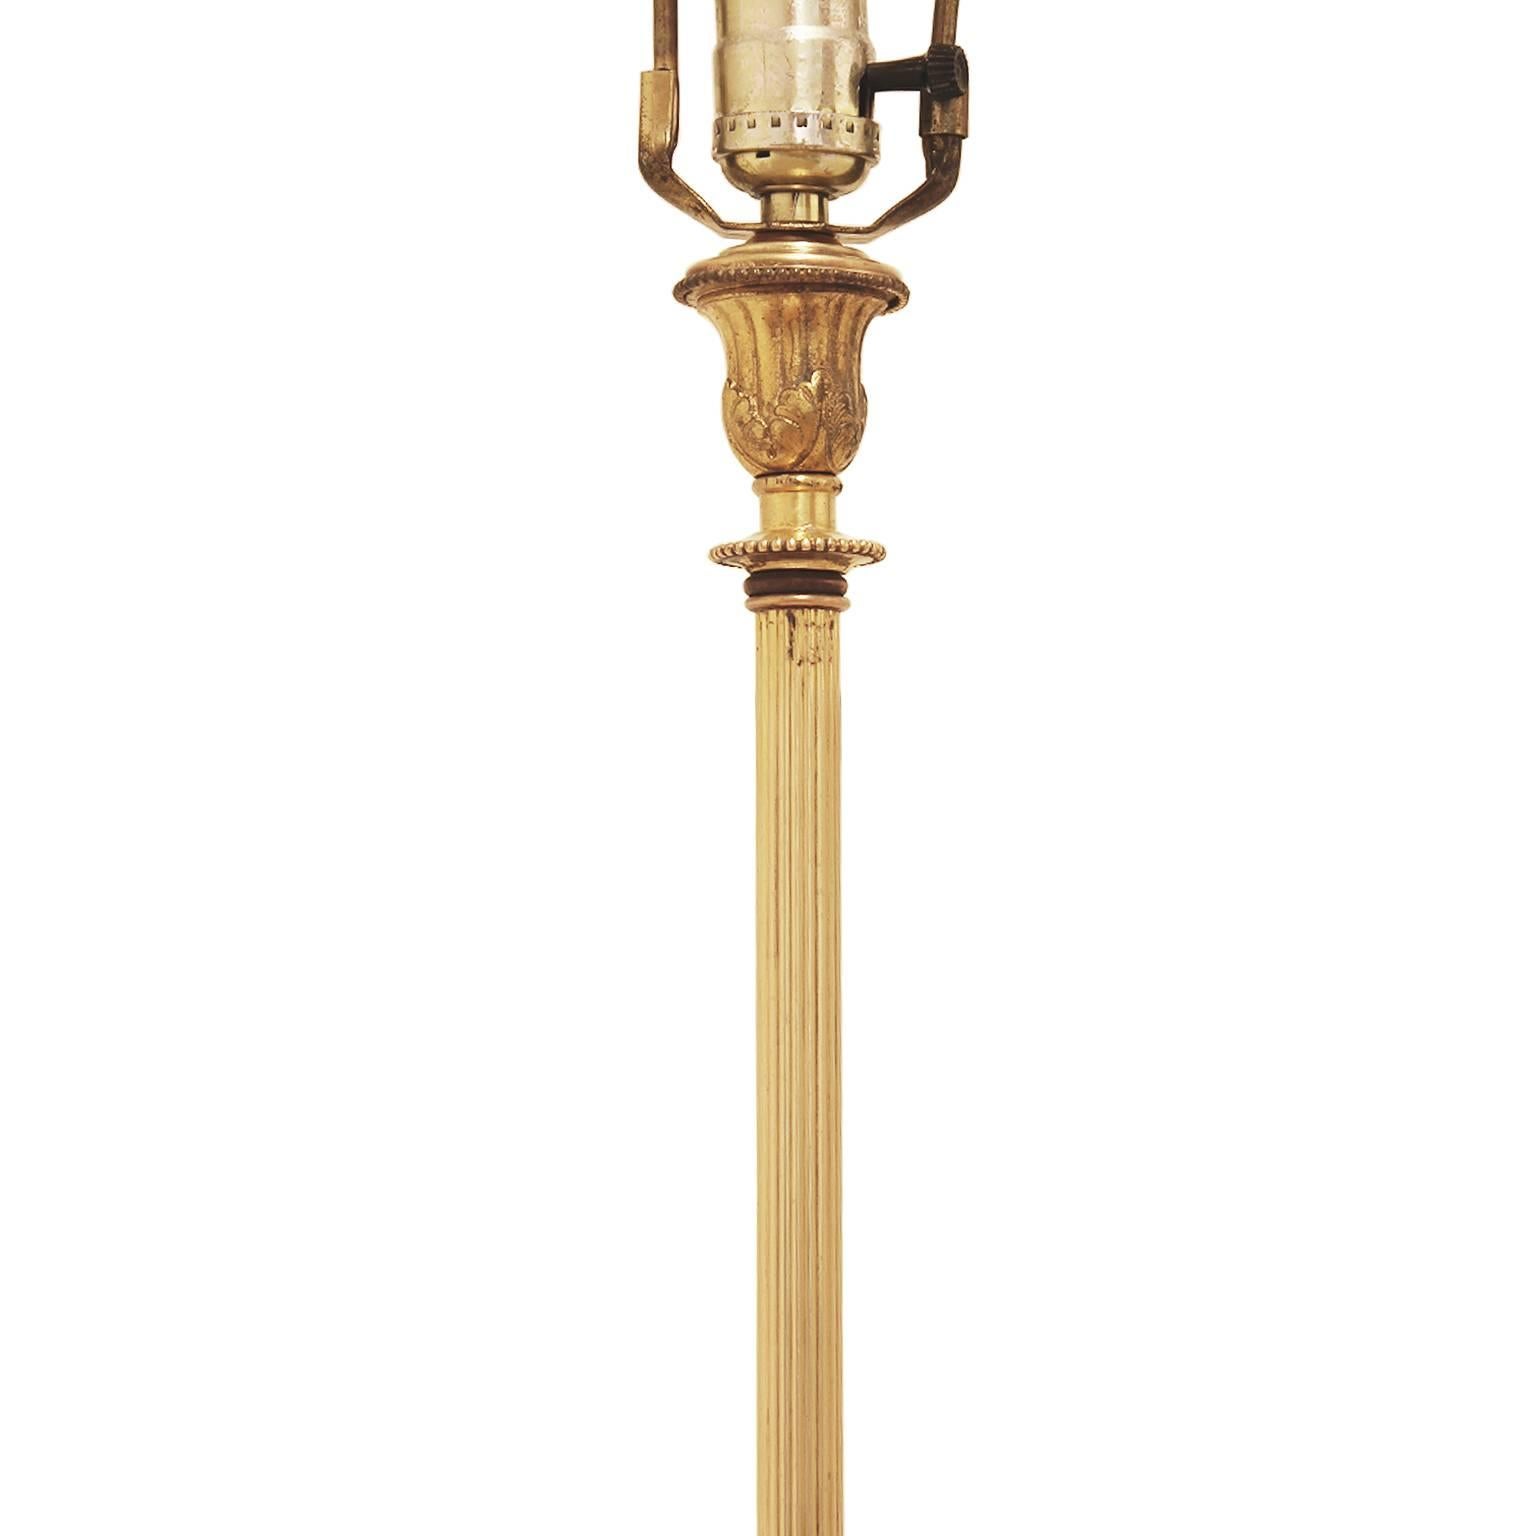 Early 20th Century 1920s French Claw Foot Brass Floor Lamp with Marble Base For Sale